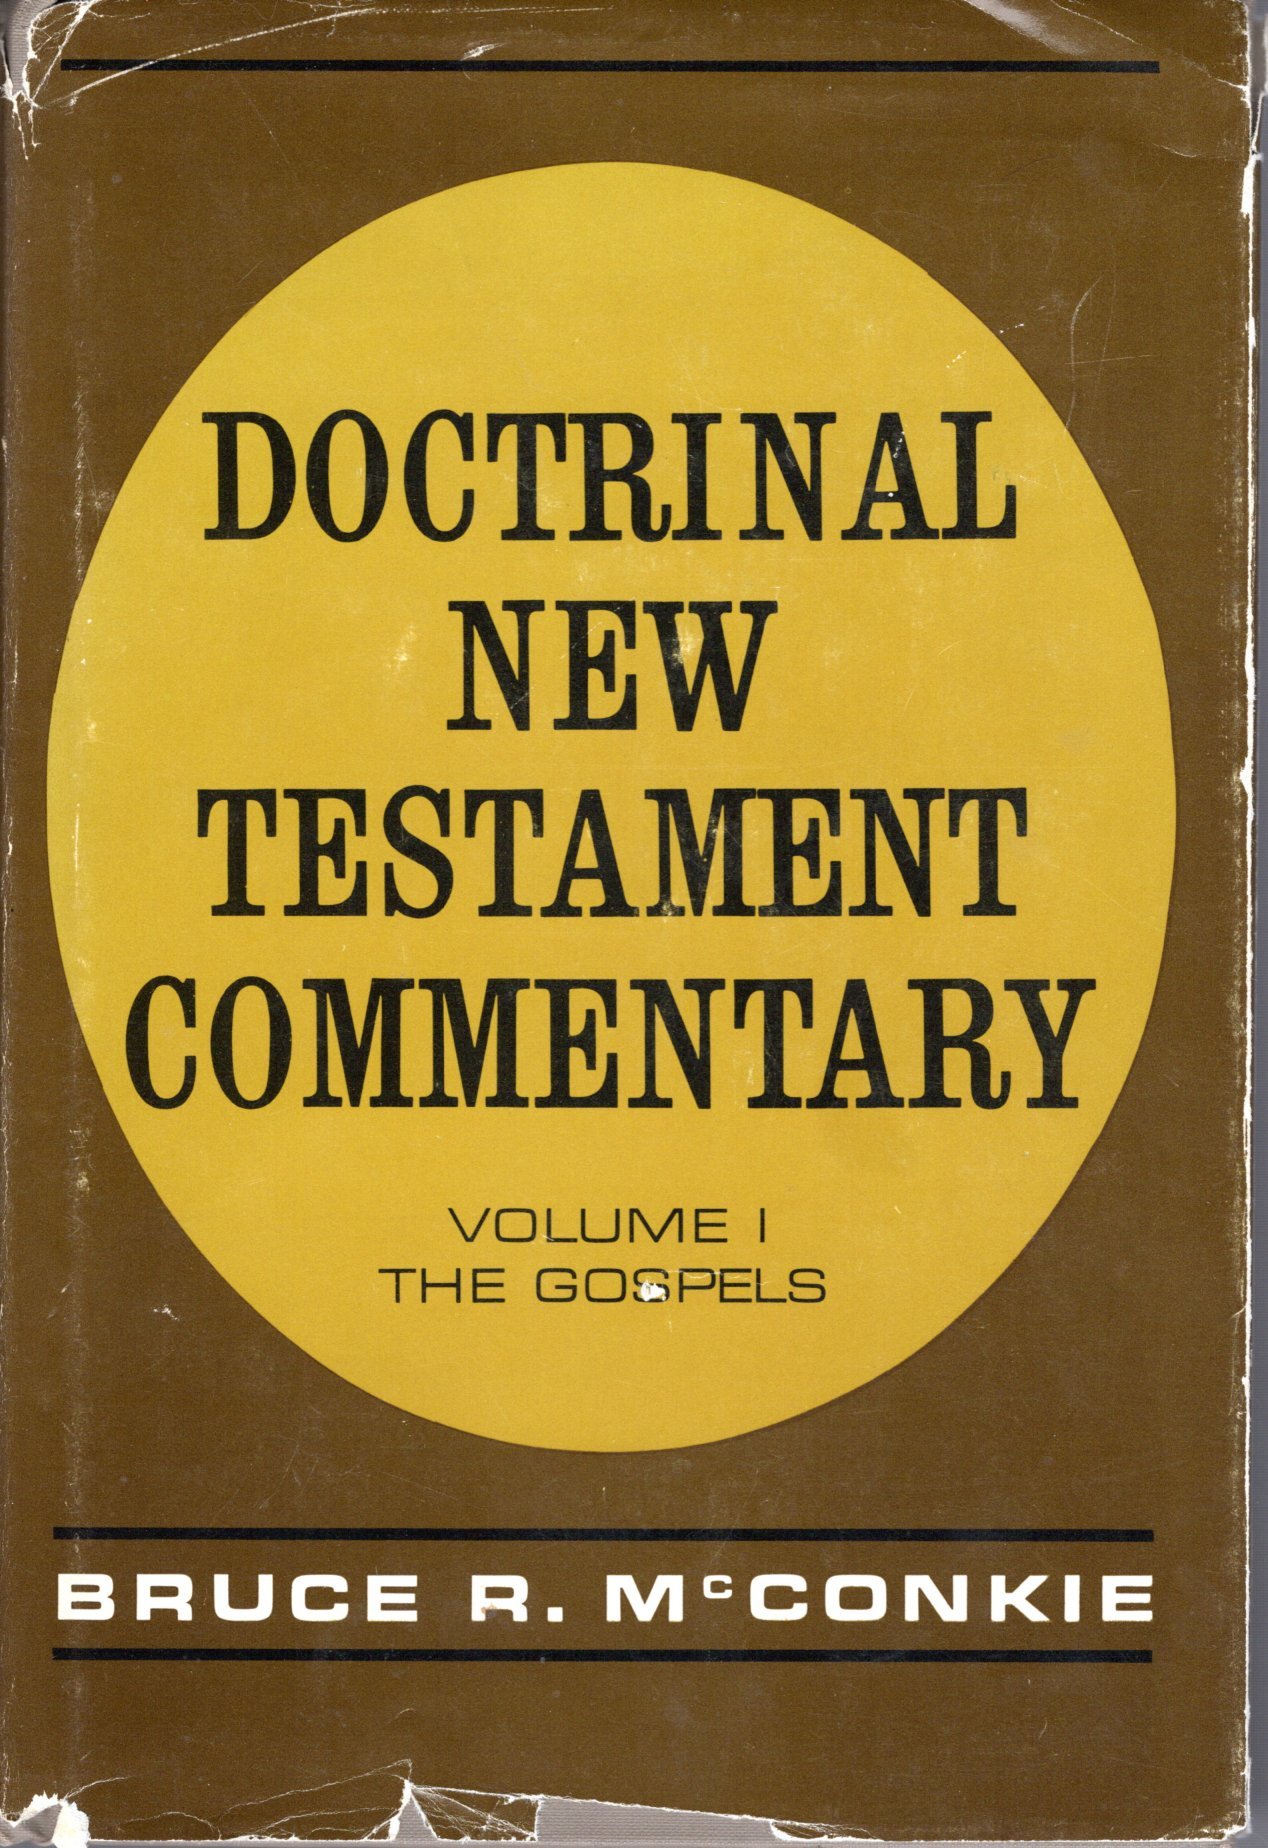 new testament commentary pdf